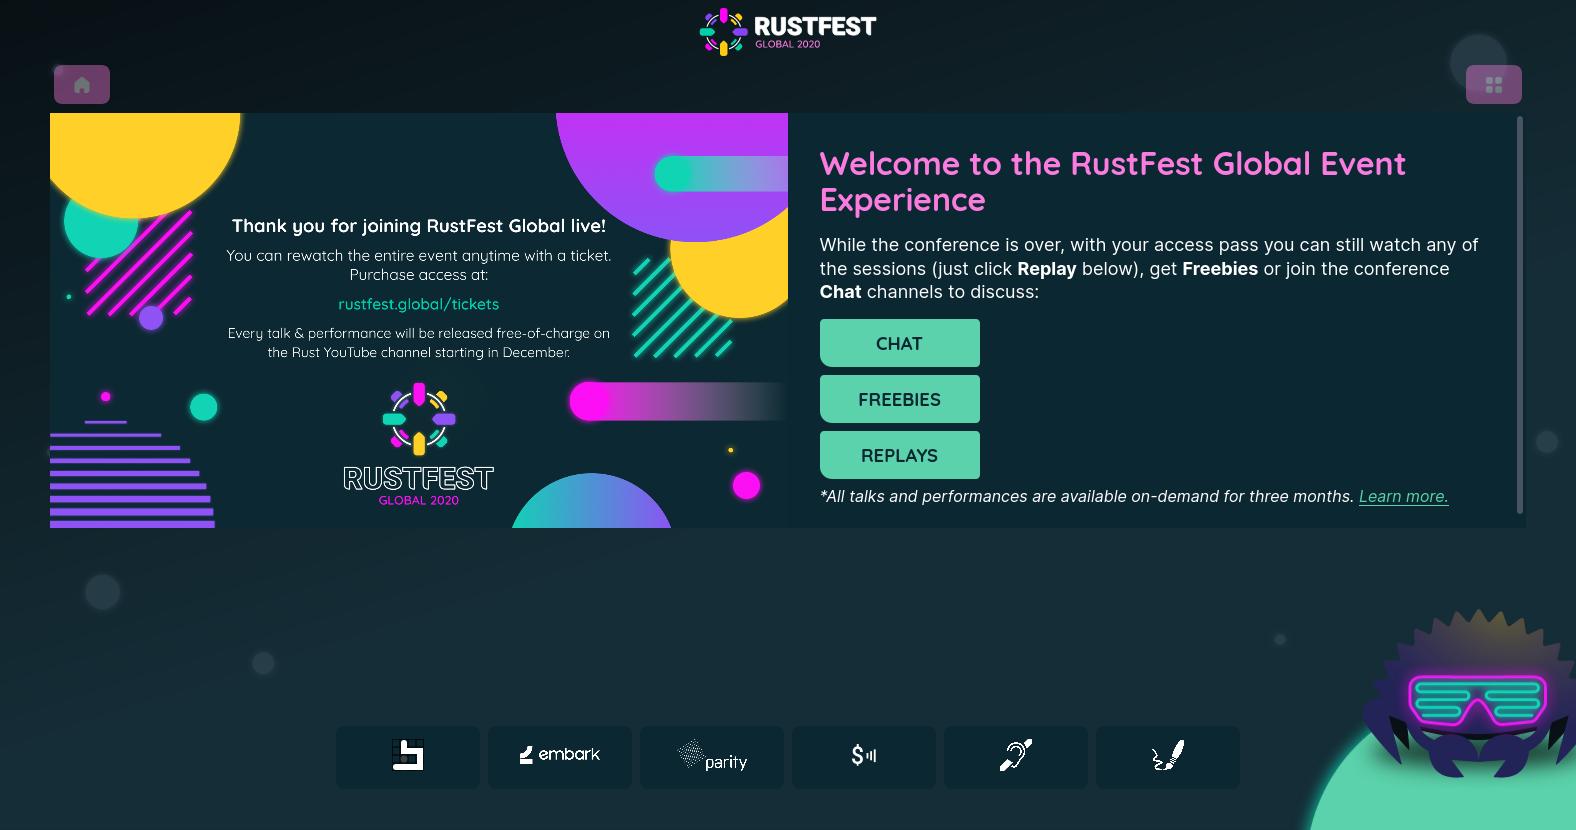 Screenshot of the RustFest Global 2020 live stream experience